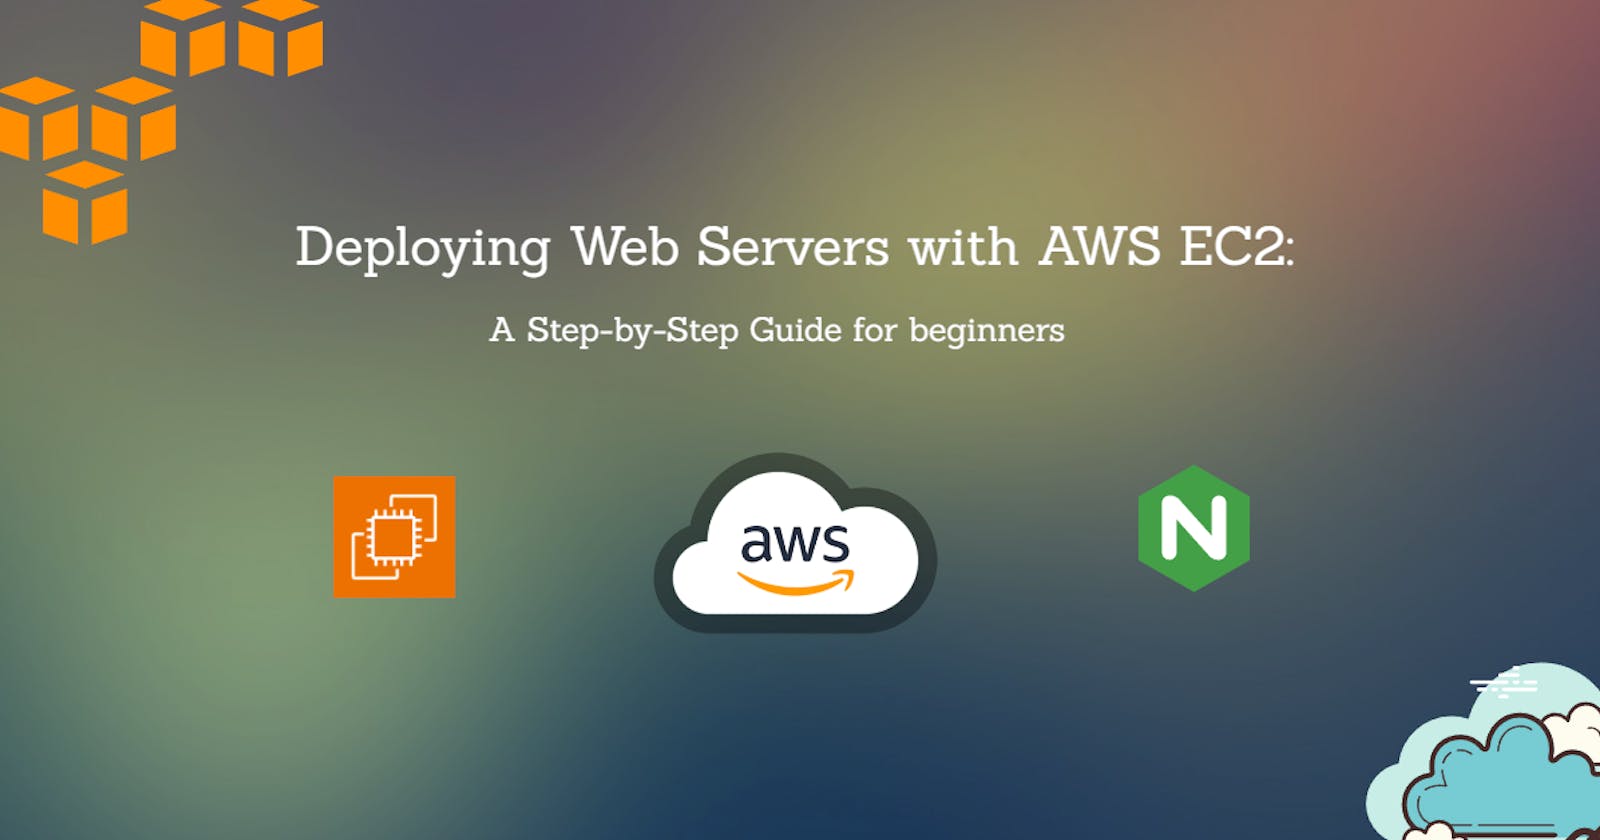 Deploying Web Servers with AWS EC2: 
A Step-by-Step Guide for beginners